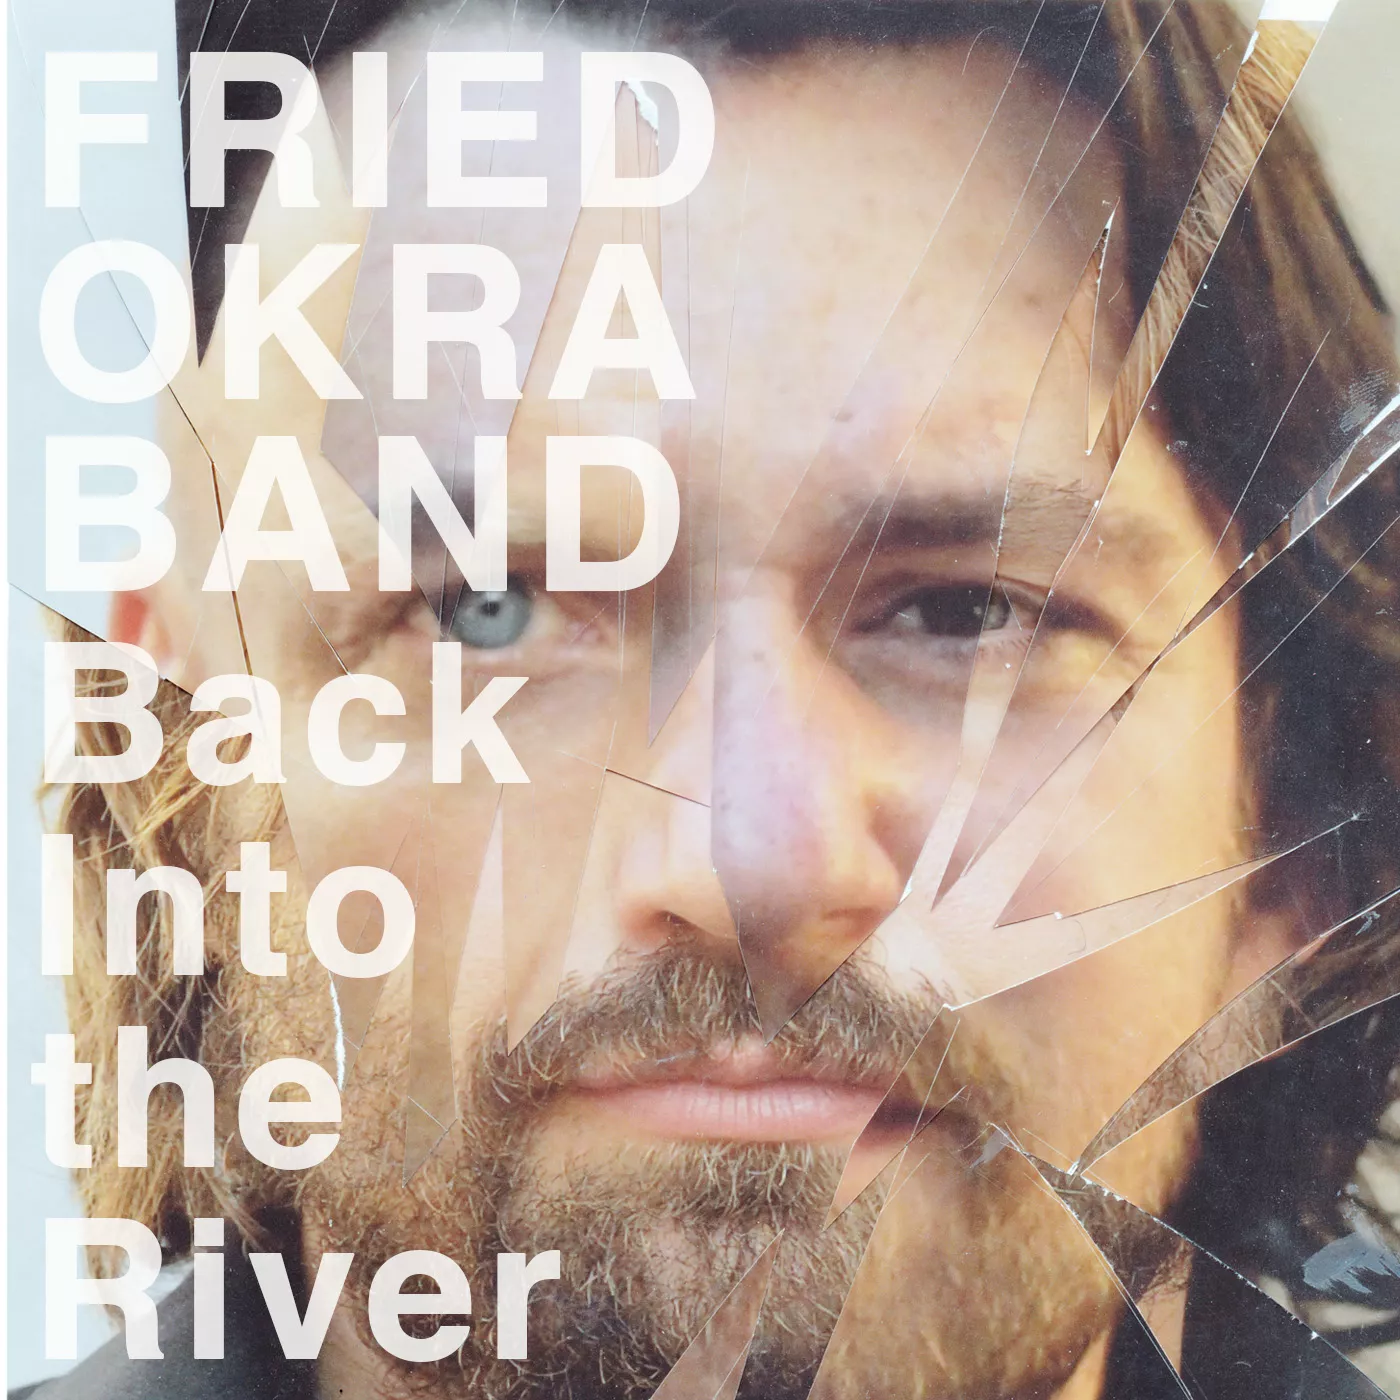 Back Into the River - The Fried Okra Band